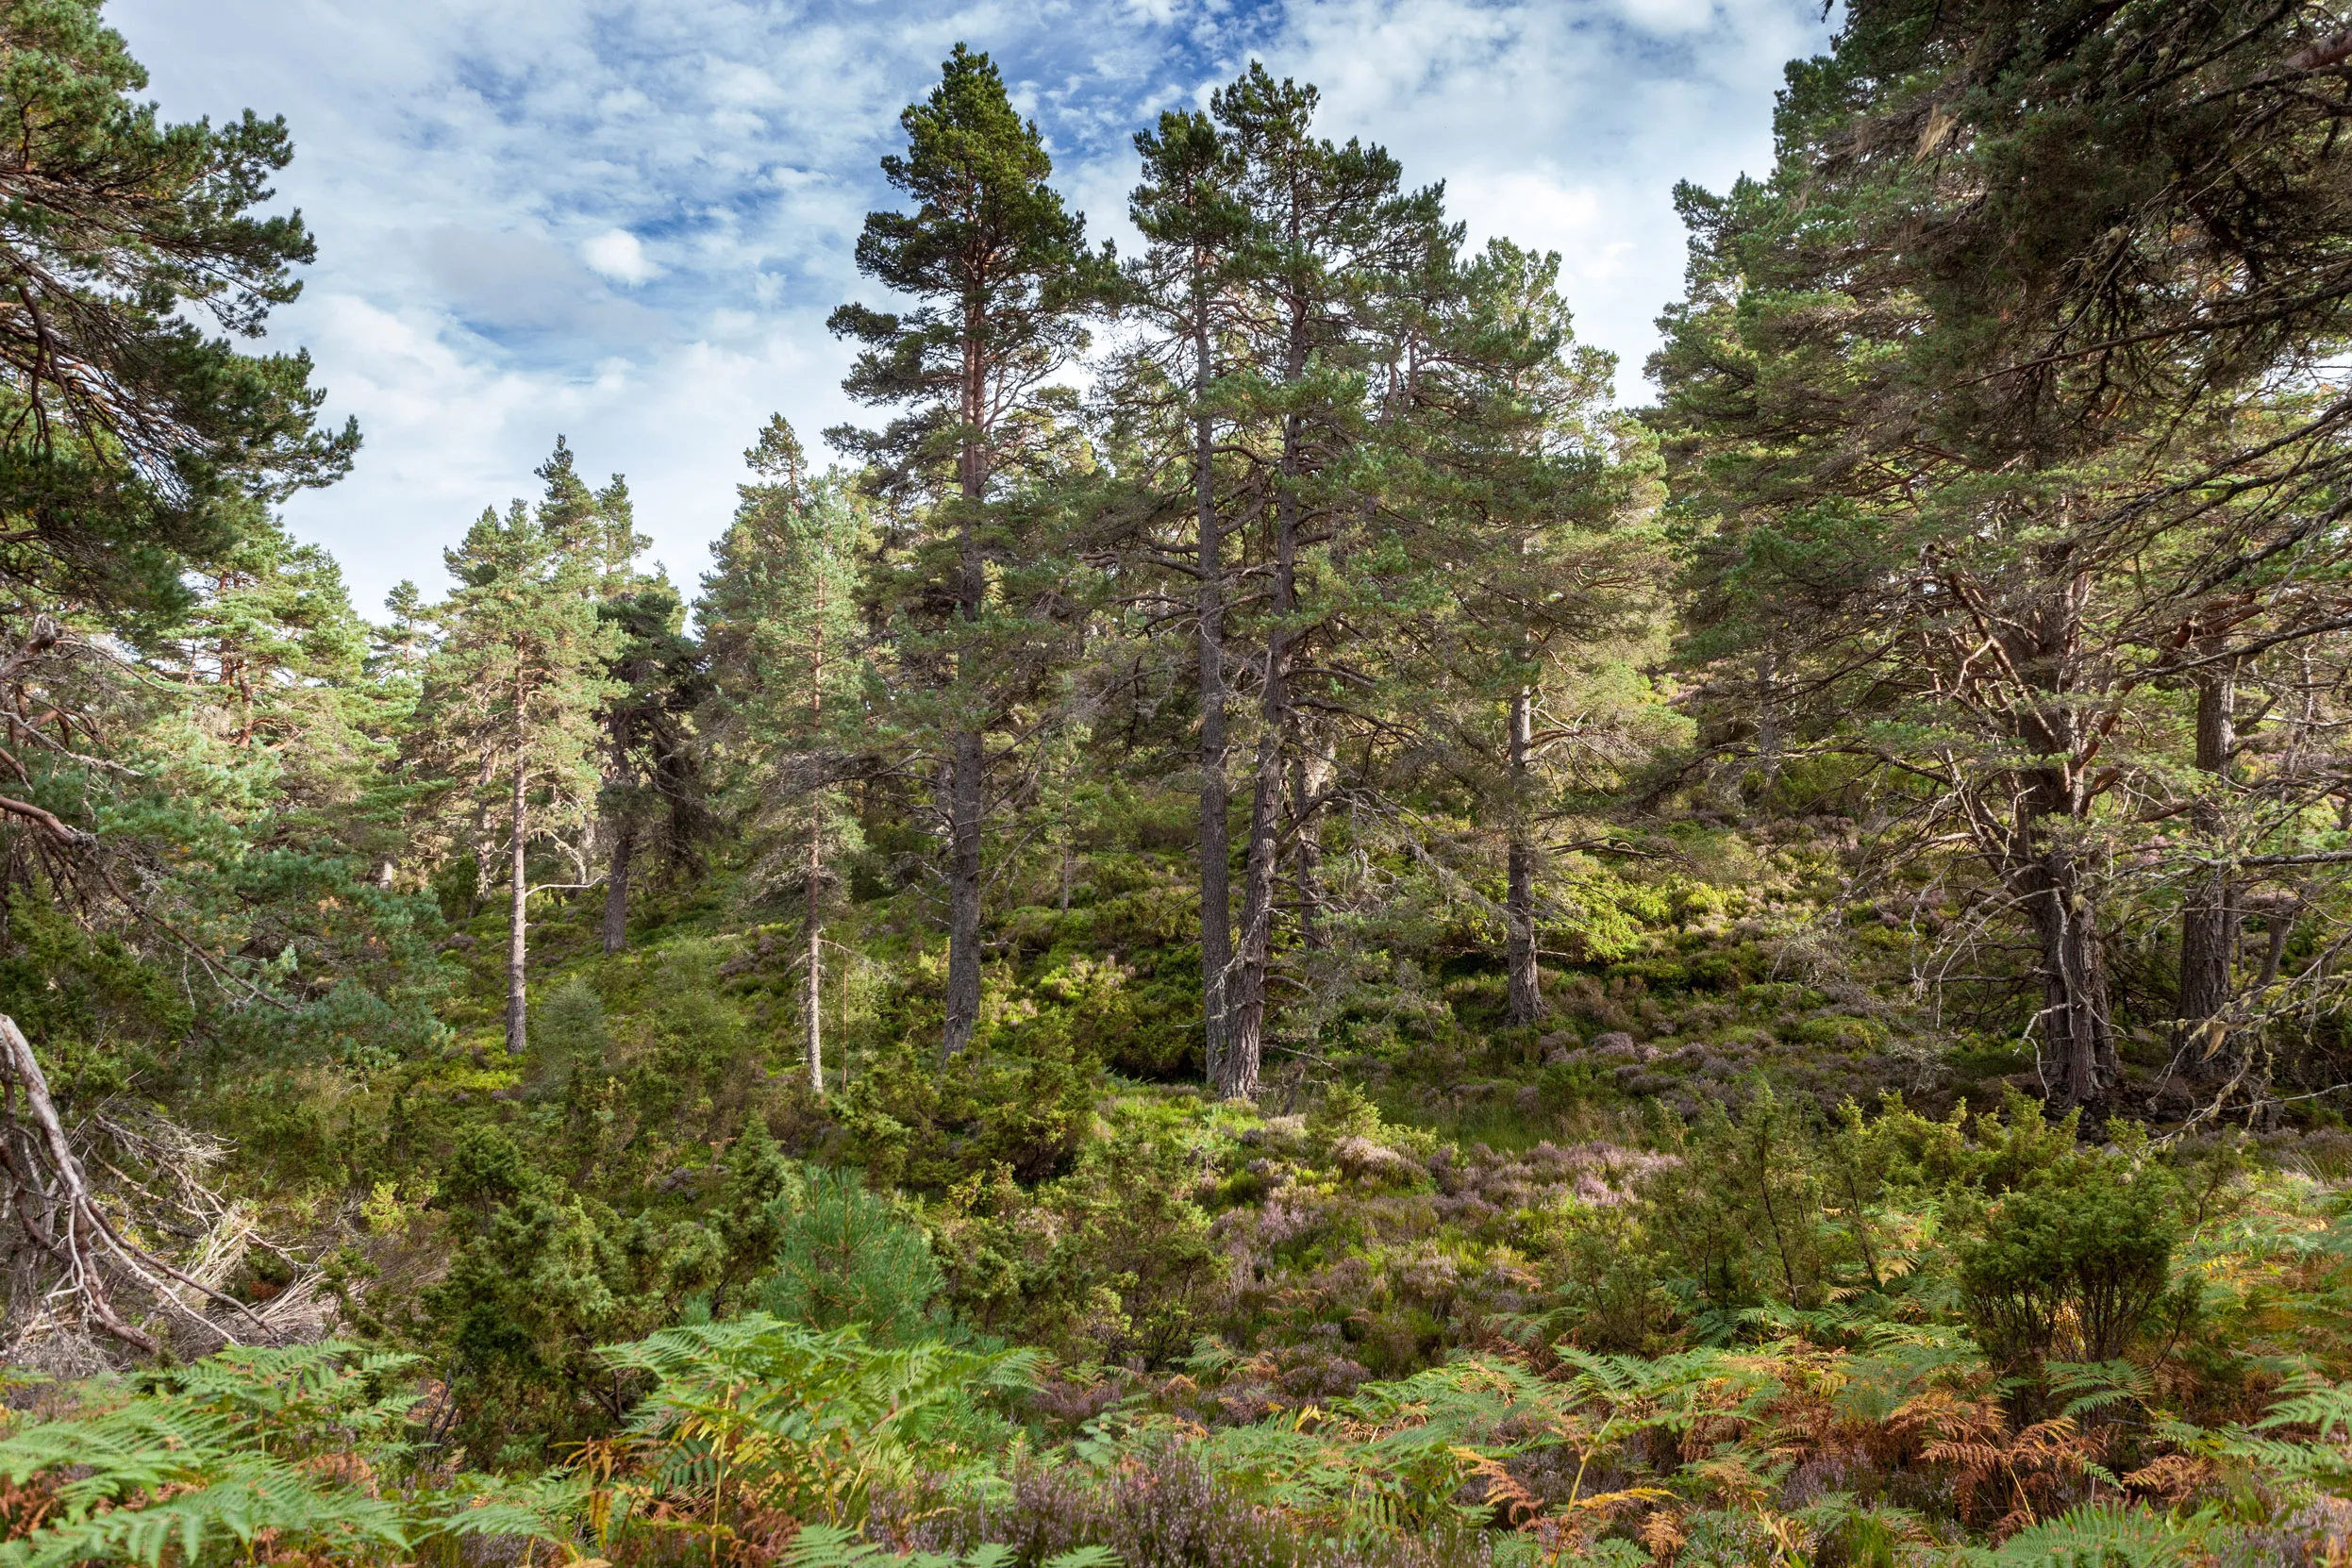 A view of a lush green woodland at Abernethy, with a forest floor full of greenery.